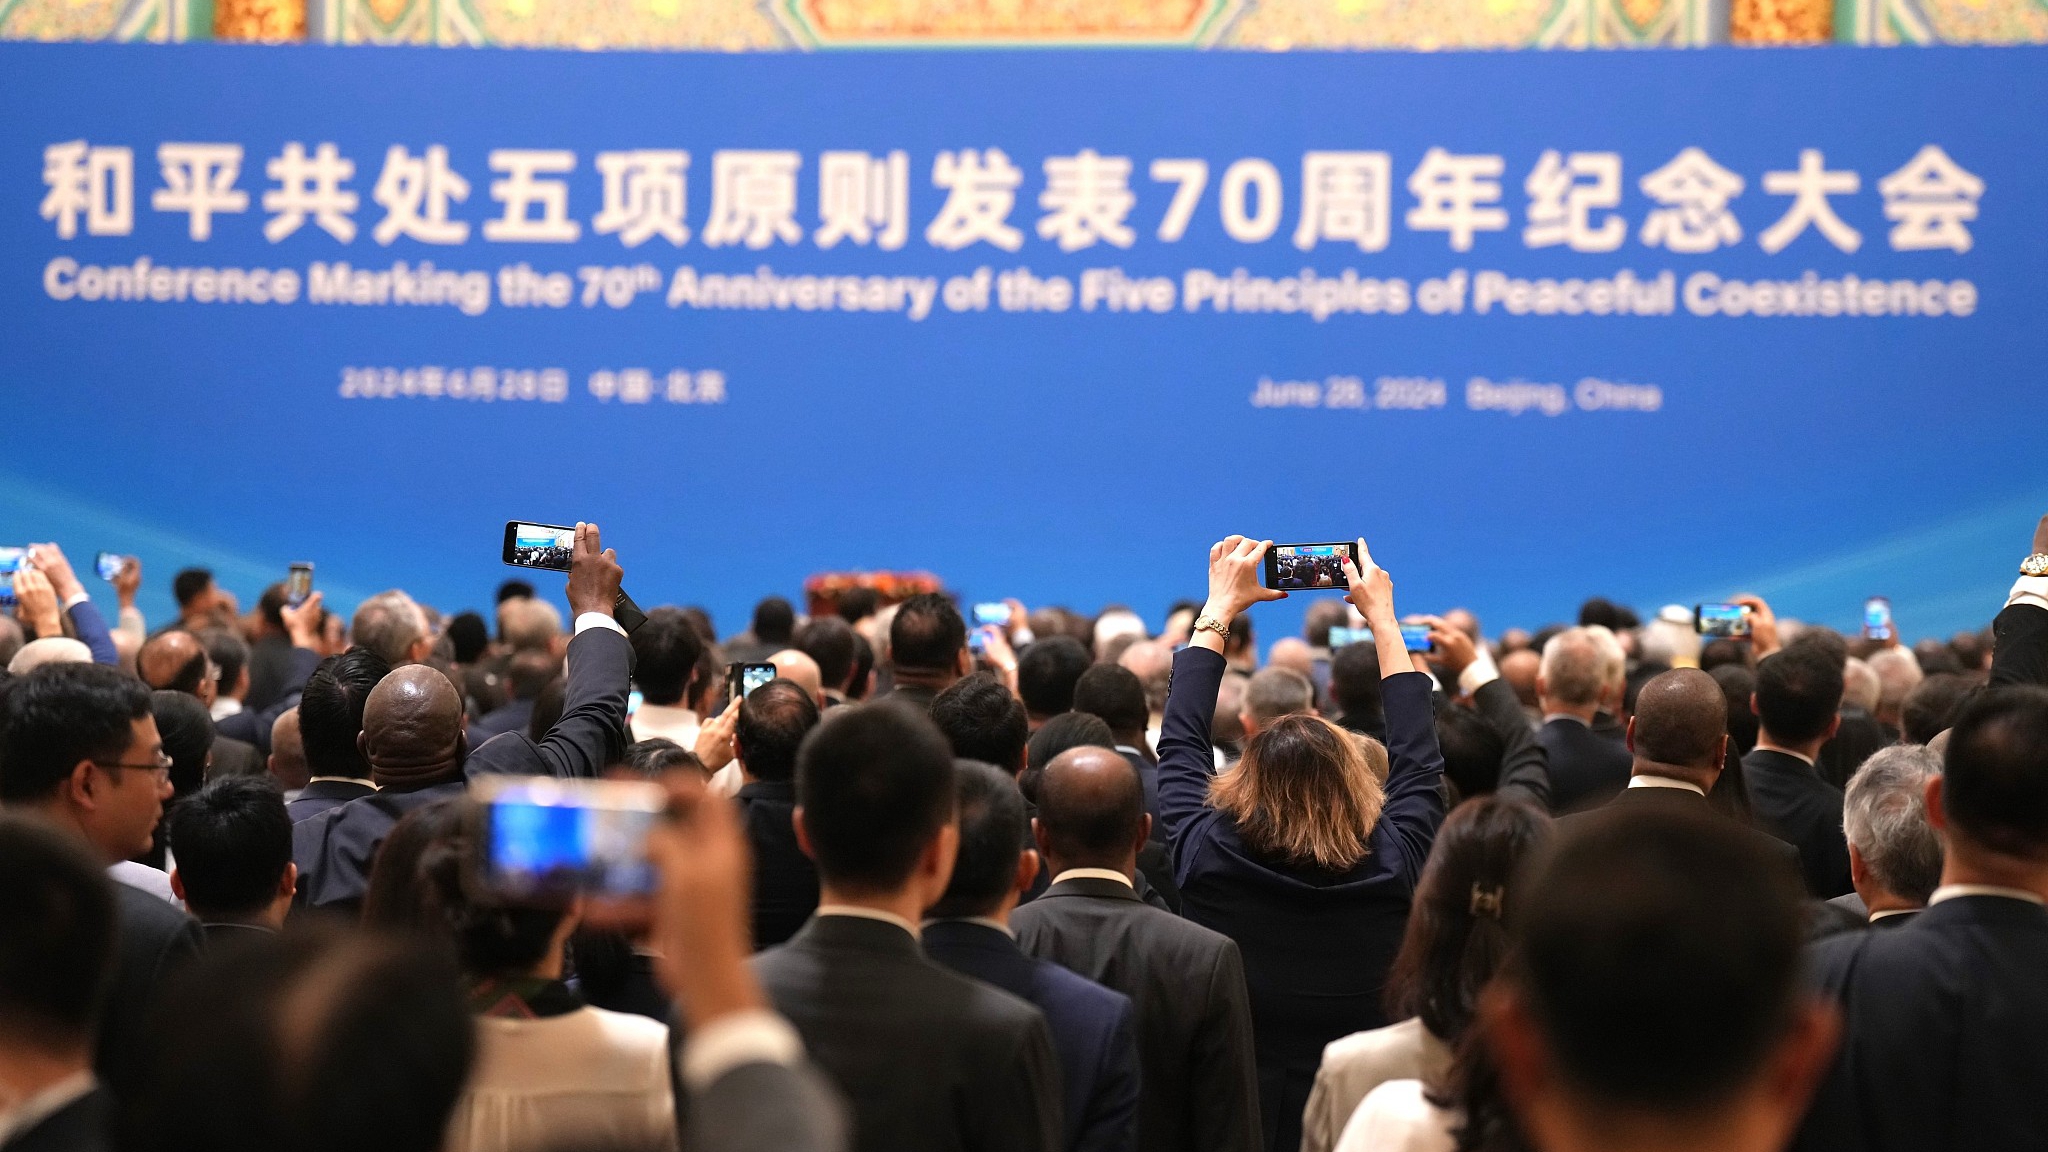 The Conference Marking the 70th Anniversary of the Five Principles of Peaceful Coexistence in Beijing, China, June 28, 2024. /CFP